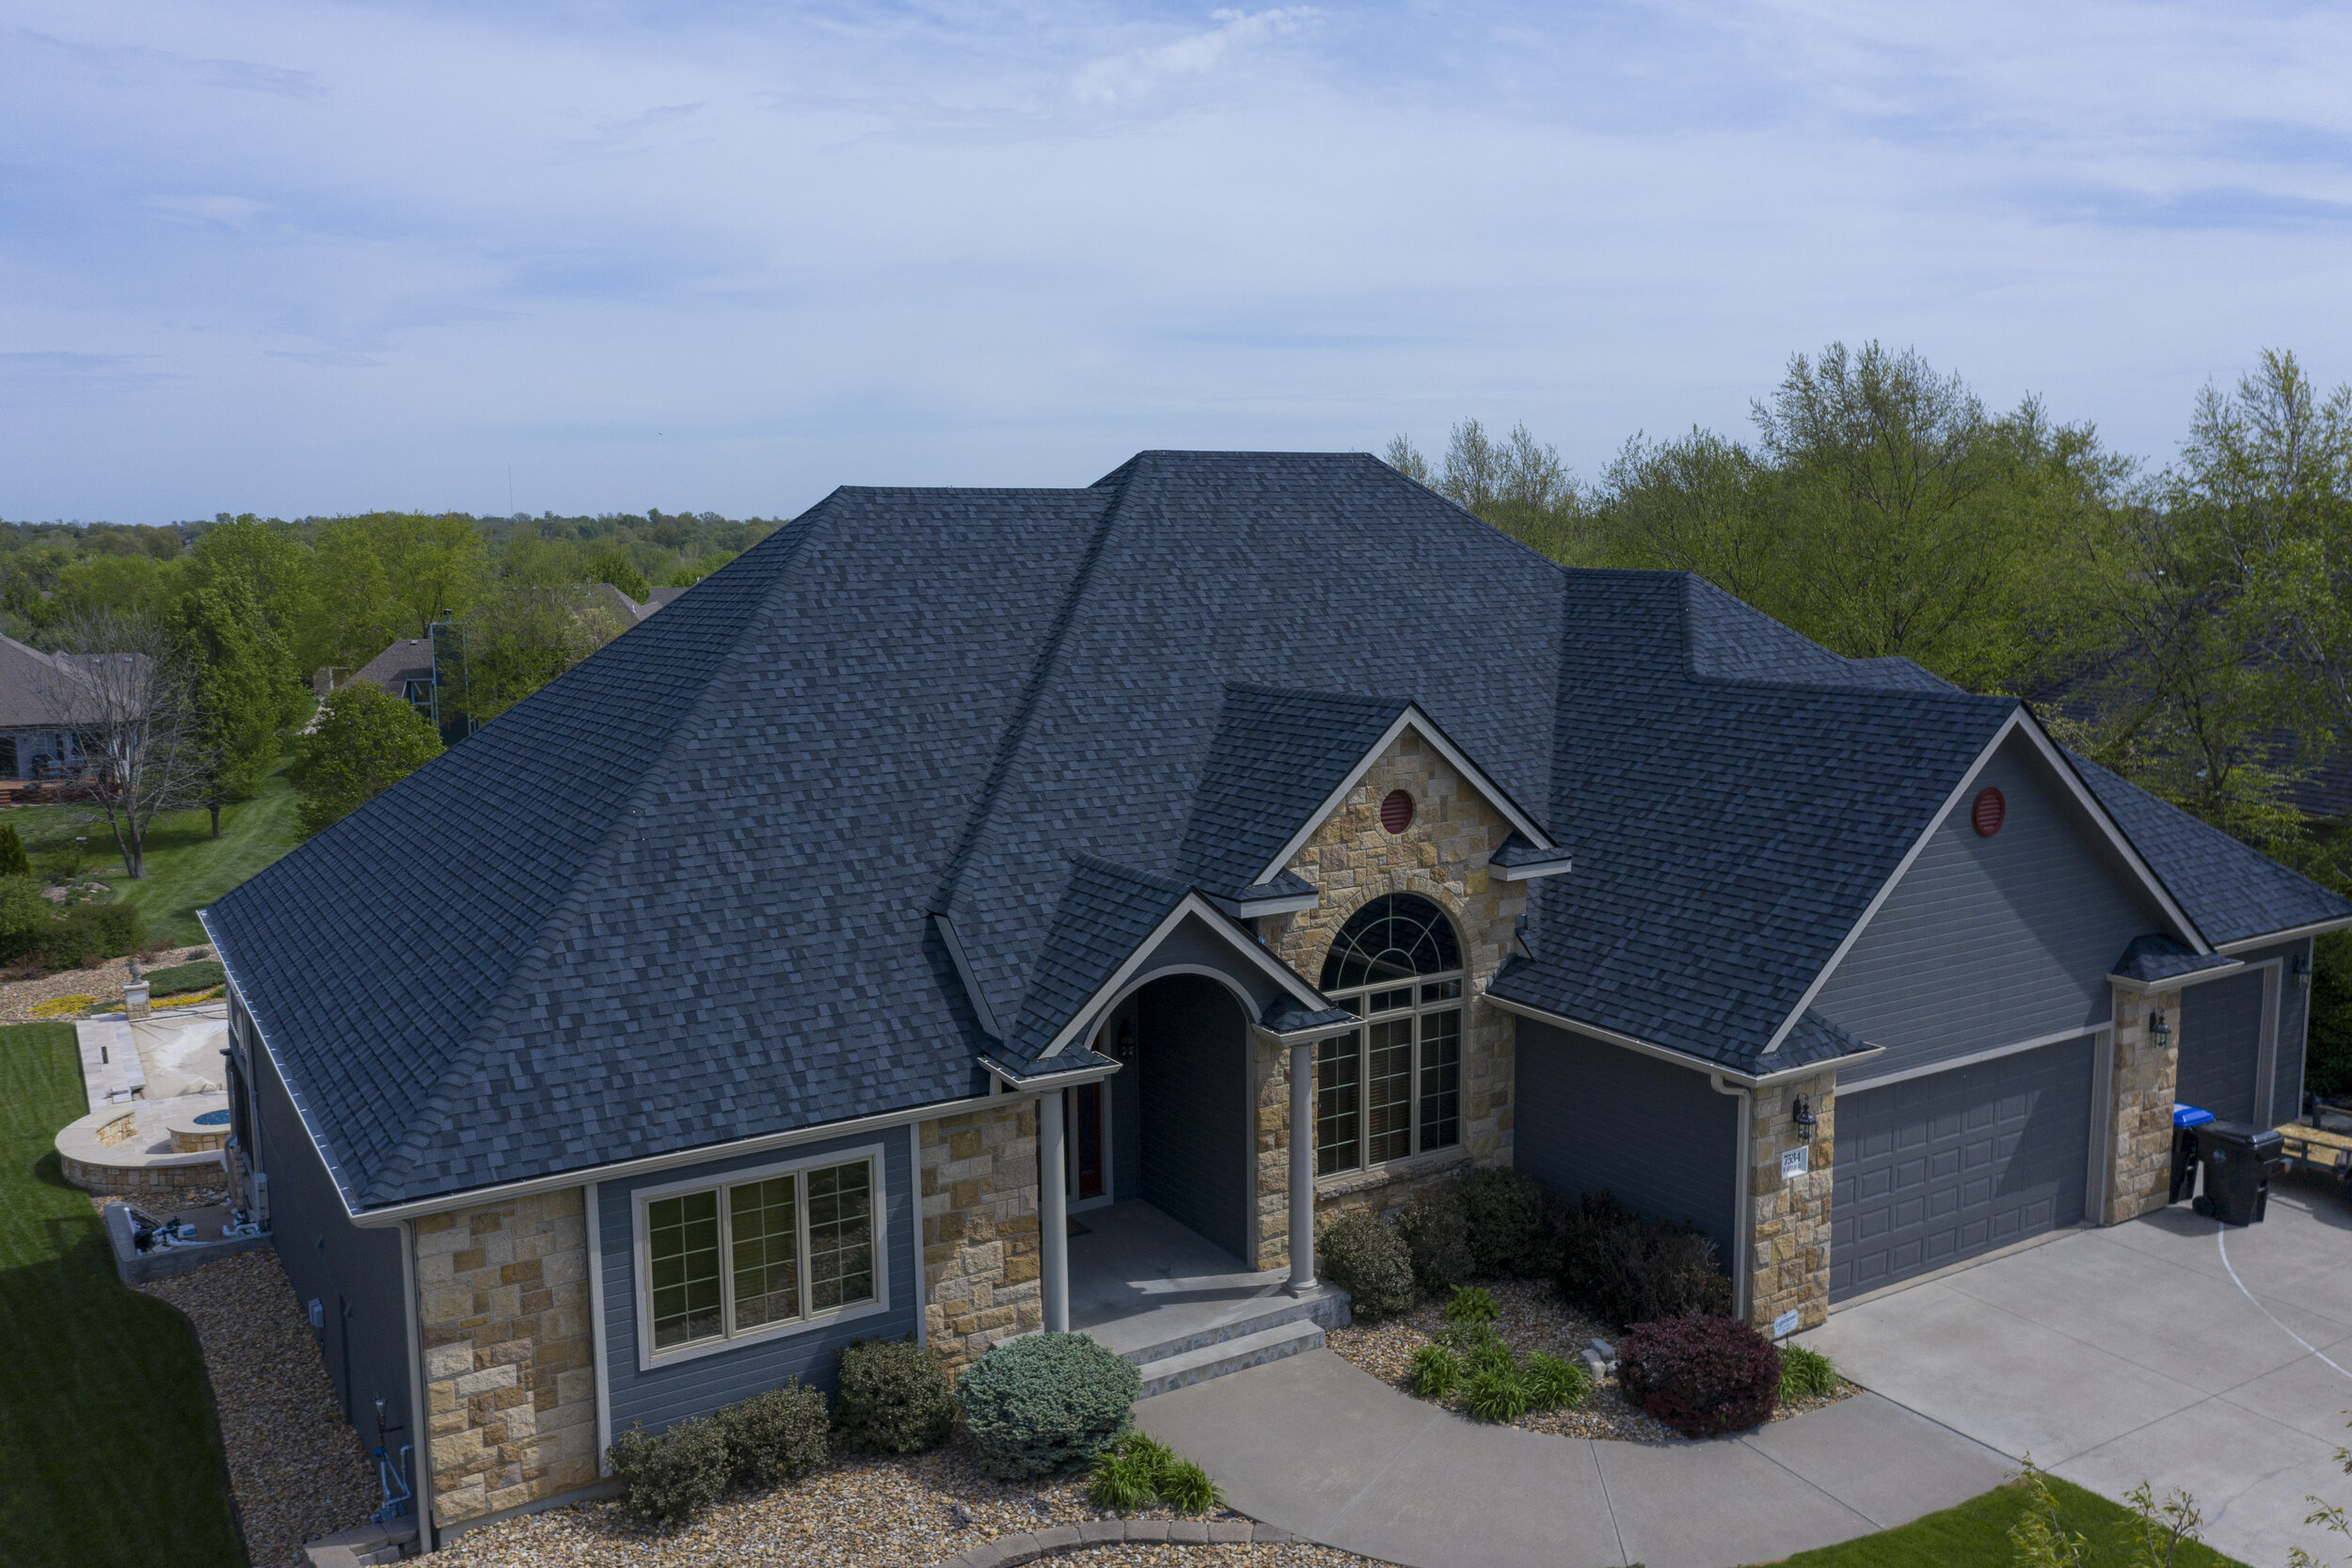 Impact Resistant Ir Roof Shingles Are They Worth It